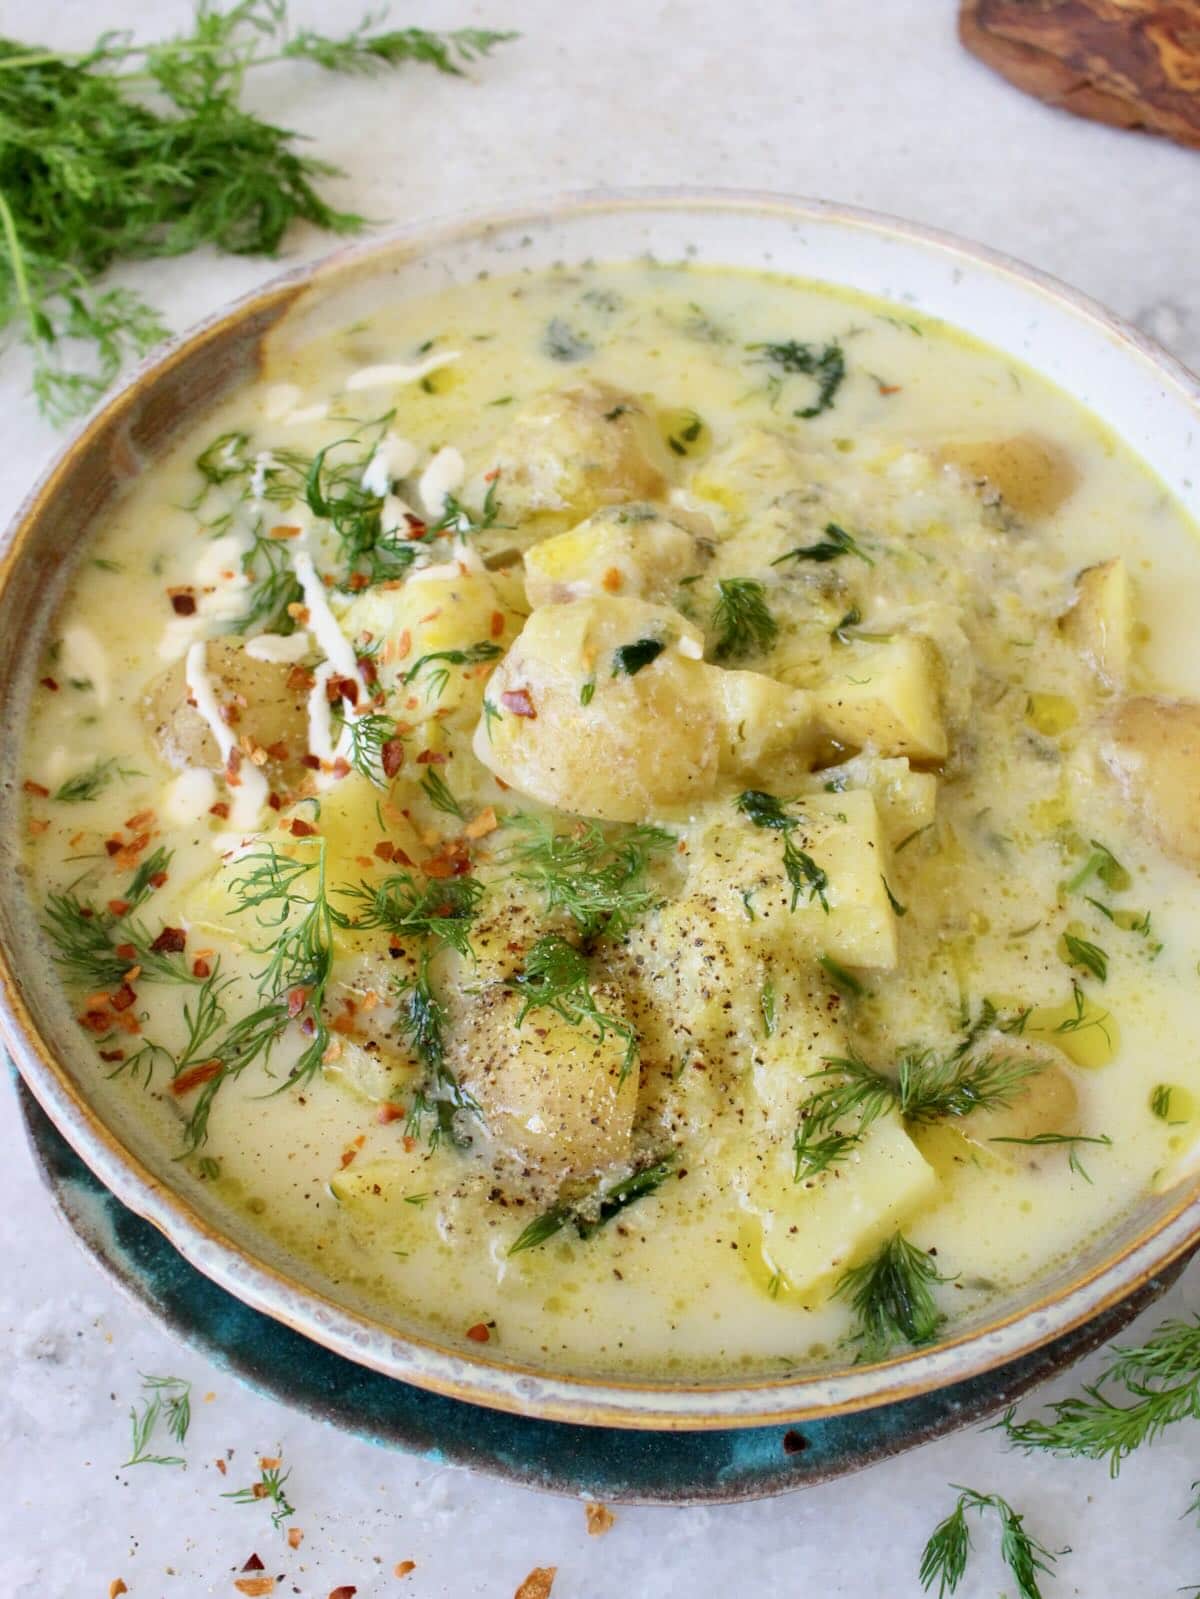 Chunky potato soup with dill, leeks and sour cream